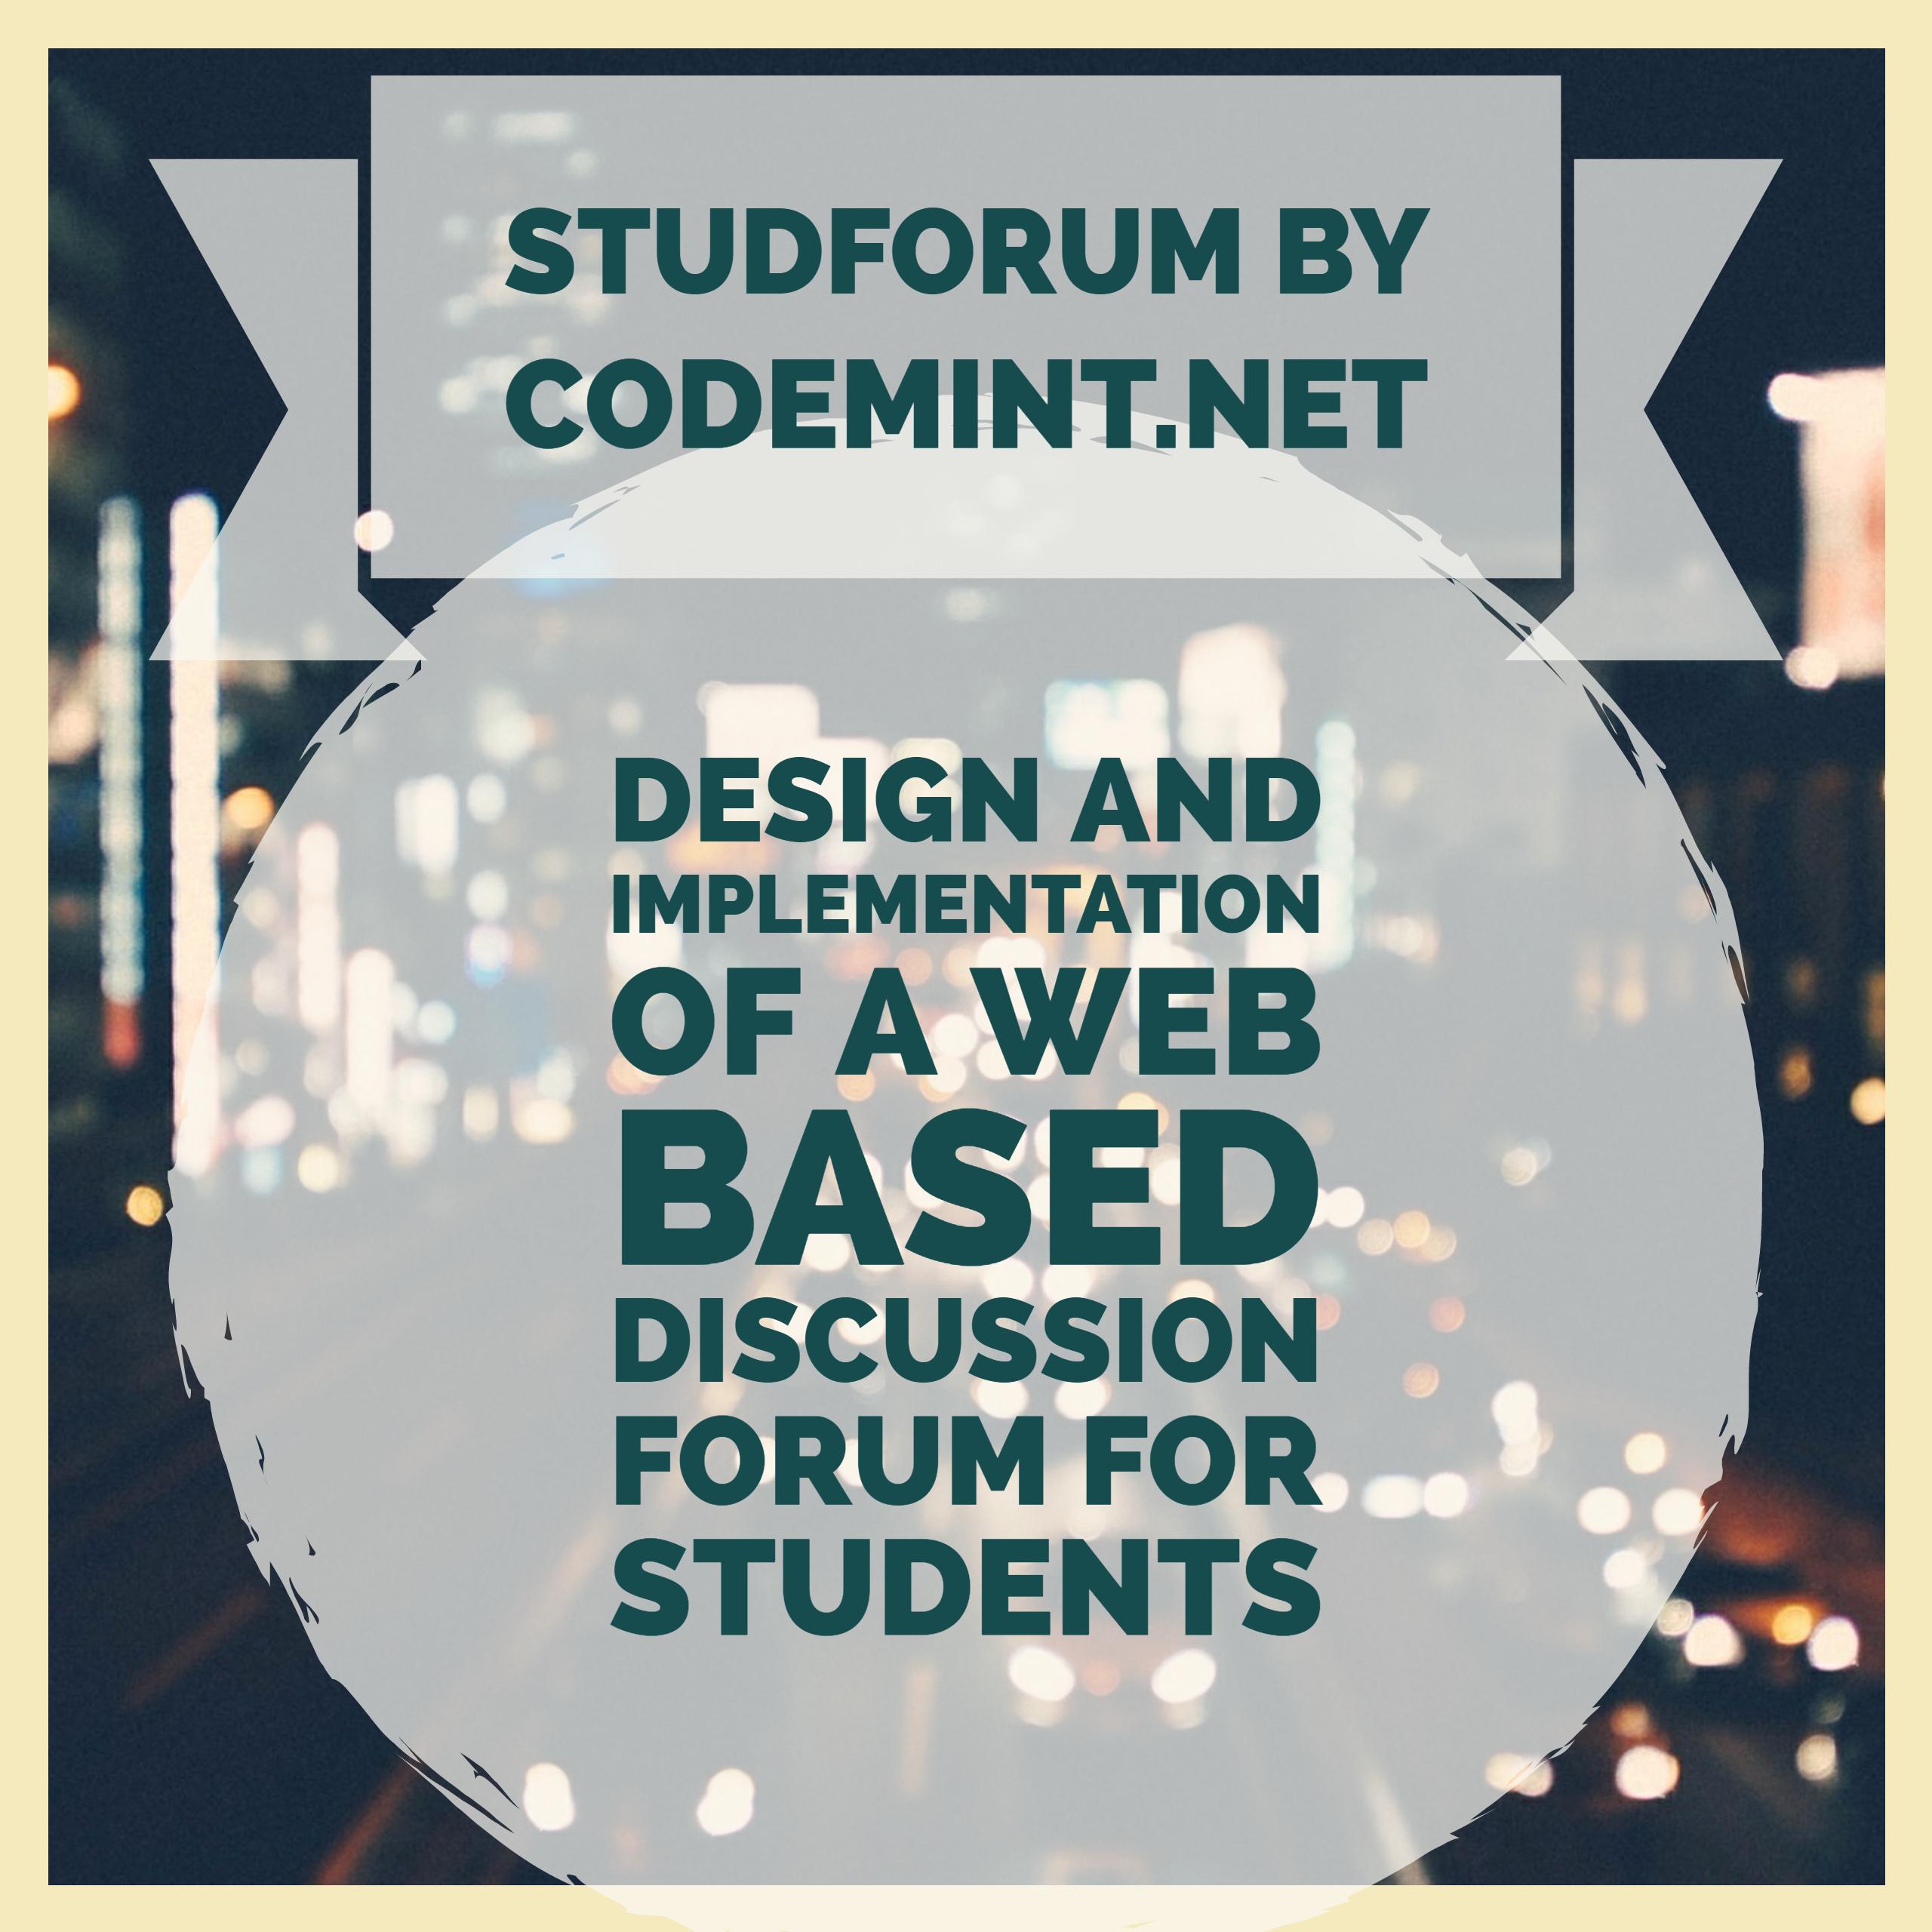 StudForum - Design and Implementation of a Web Based Discussion Forum For Students